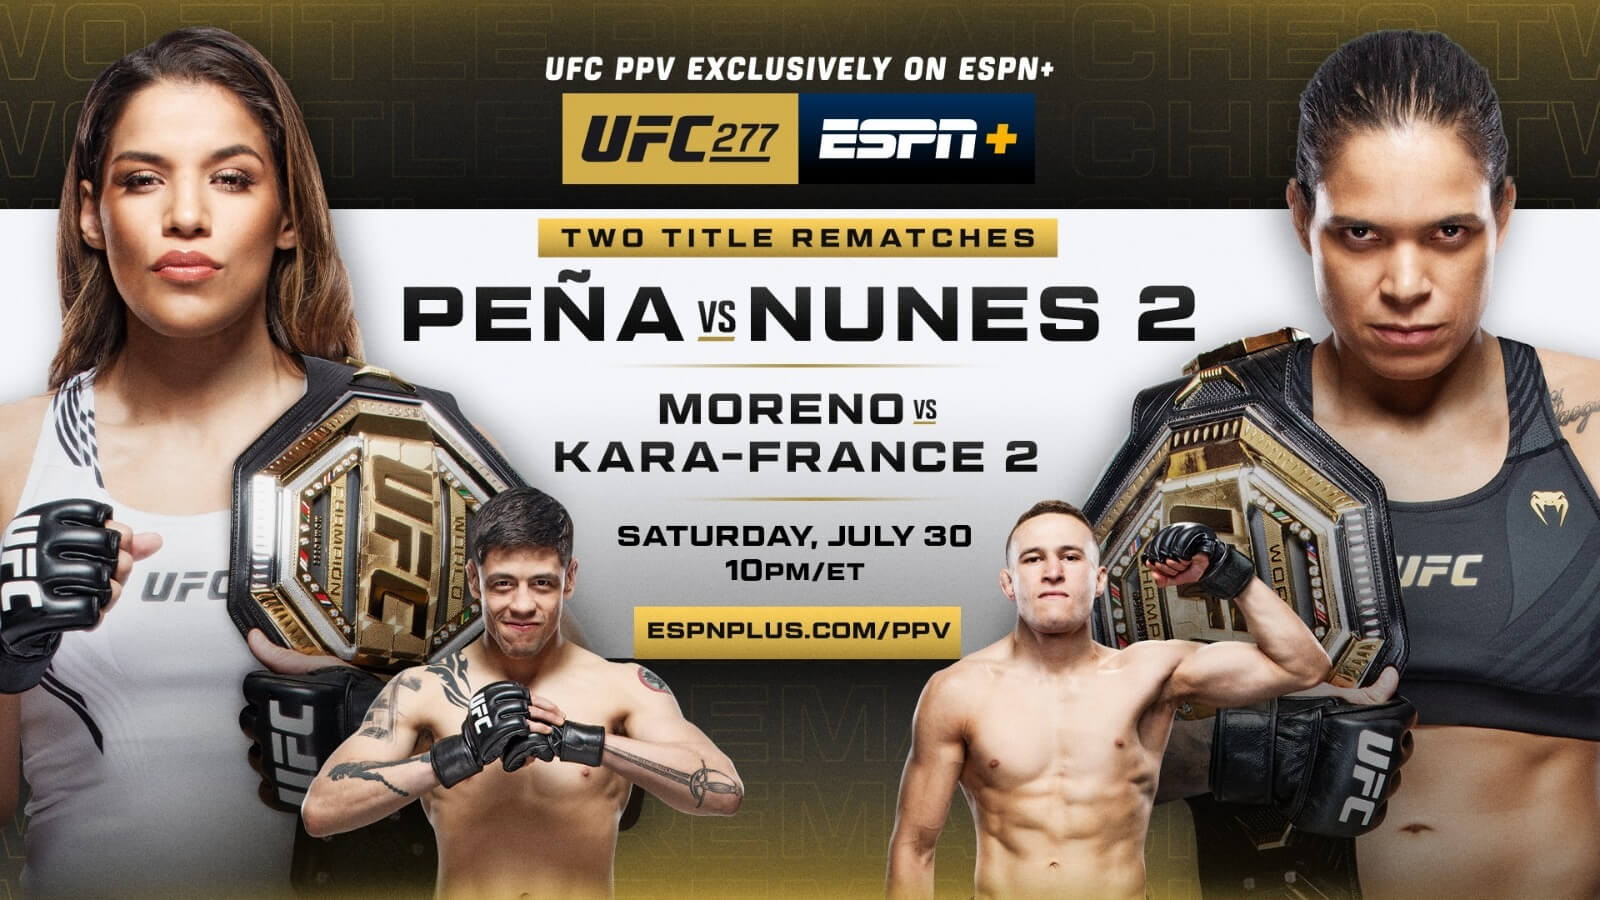 How To Watch UFC 277 Live Without Cable Peña vs